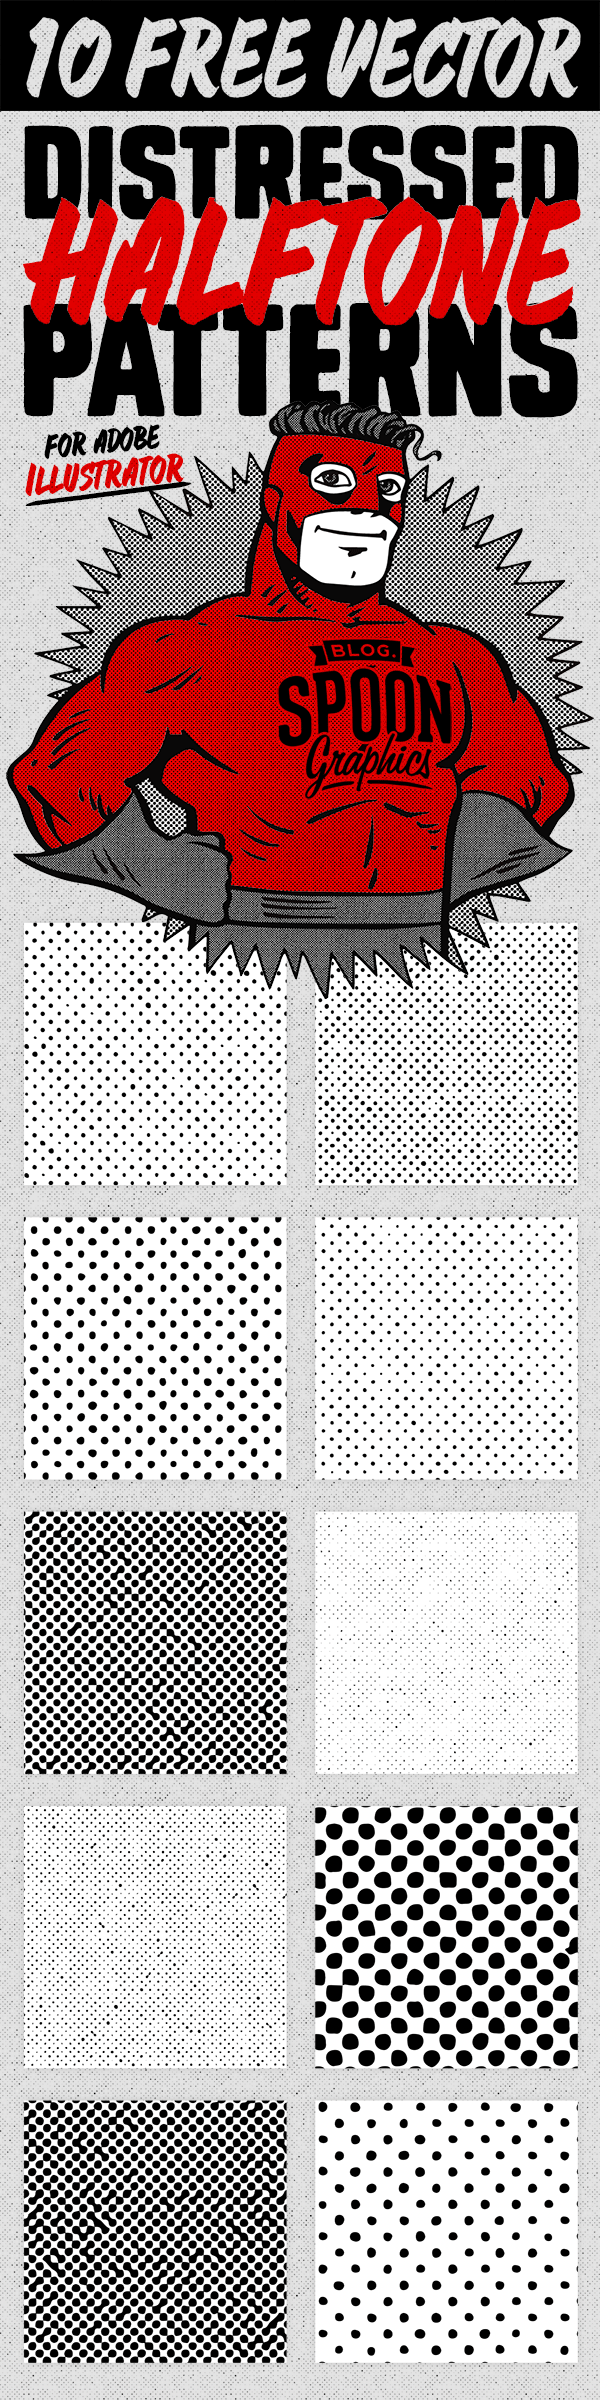 10 Free Distressed Vector Halftone Patterns